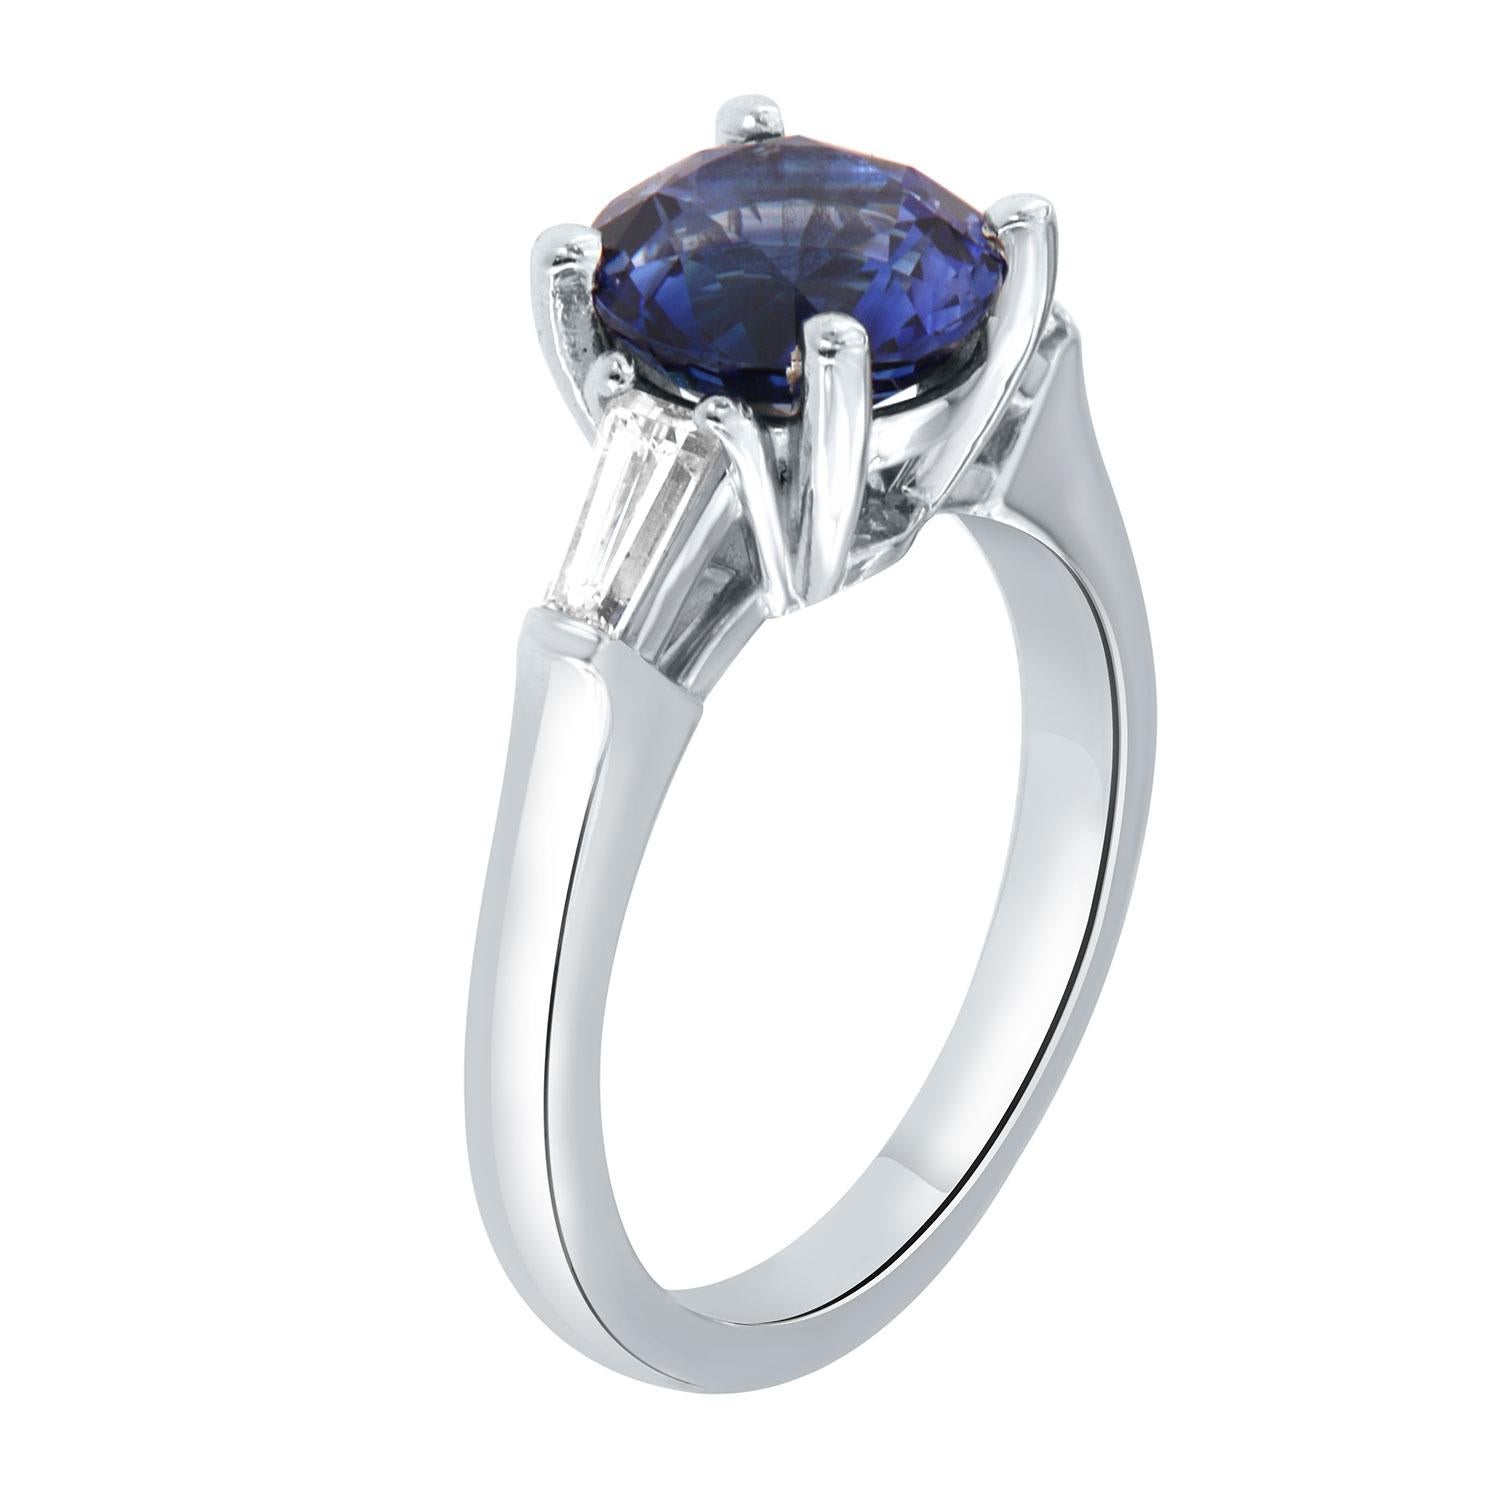 This classic platinum ring features a 2.65 Carat Oval shape Vivid Blue Natural Sapphire flanked by two(2) Baguette-shaped diamonds in a total weight of 0.40 Carat on a 2.4 mm wide band. 
The Sapphire exhibits vibrant blue color in an excellent